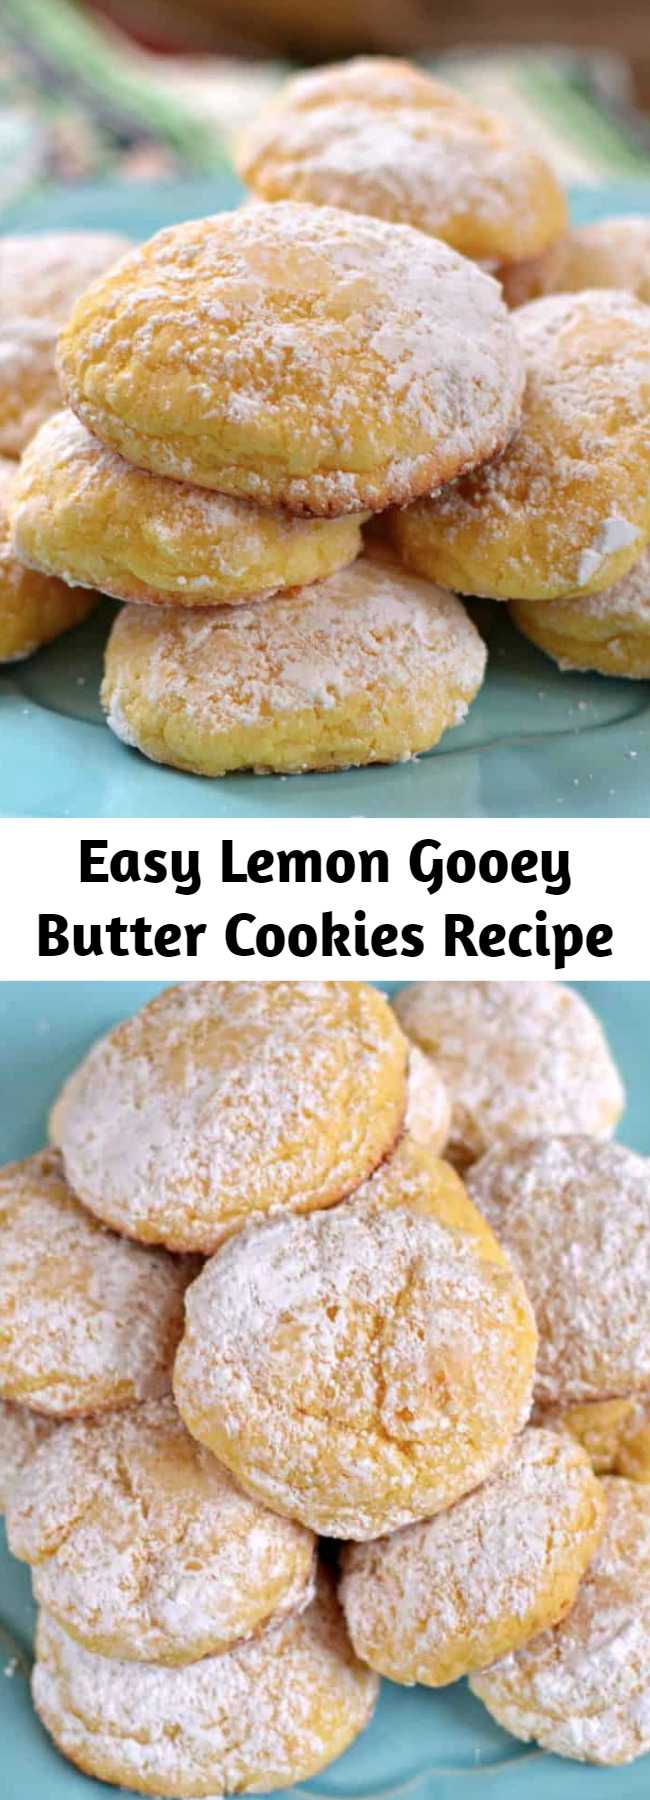 Easy Lemon Gooey Butter Cookies Recipe - An easy gooey lemon cake box cookie with just seven ingredients. Make a whole batch of cookies in less than 30 minutes. These will melt in your mouth!